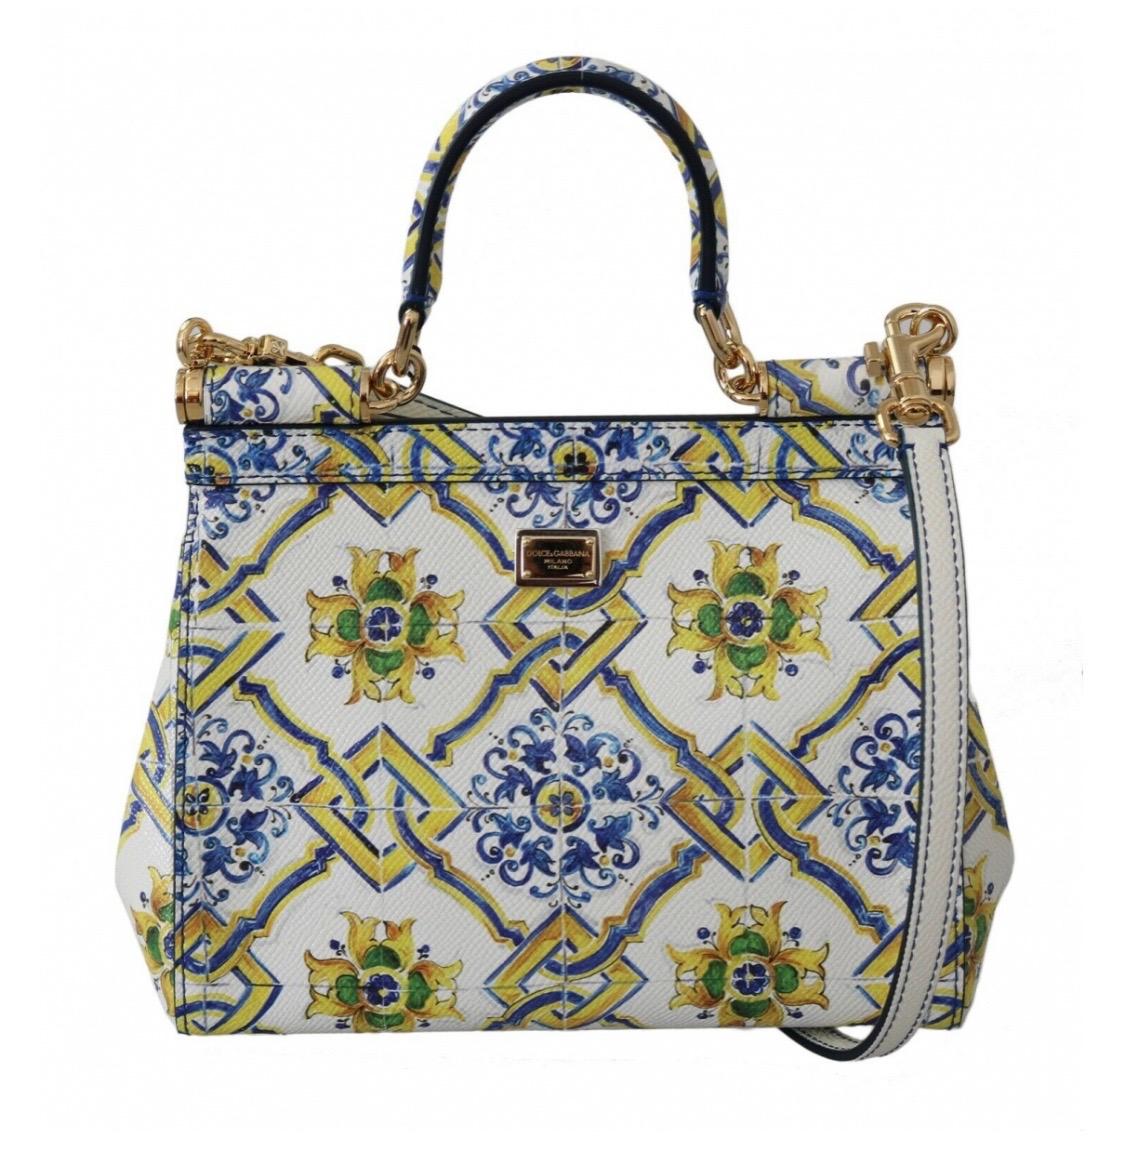 Absolutely stunning, 100%
Authentic, brand new with tags Dolce
& Gabbana Printed dauphine leather
shoulder bag Sicily with majolica print
and metal logo plate.
Model: Sicily Bag
Color: White Majolica print
Material: 100% Leather
Magnetic